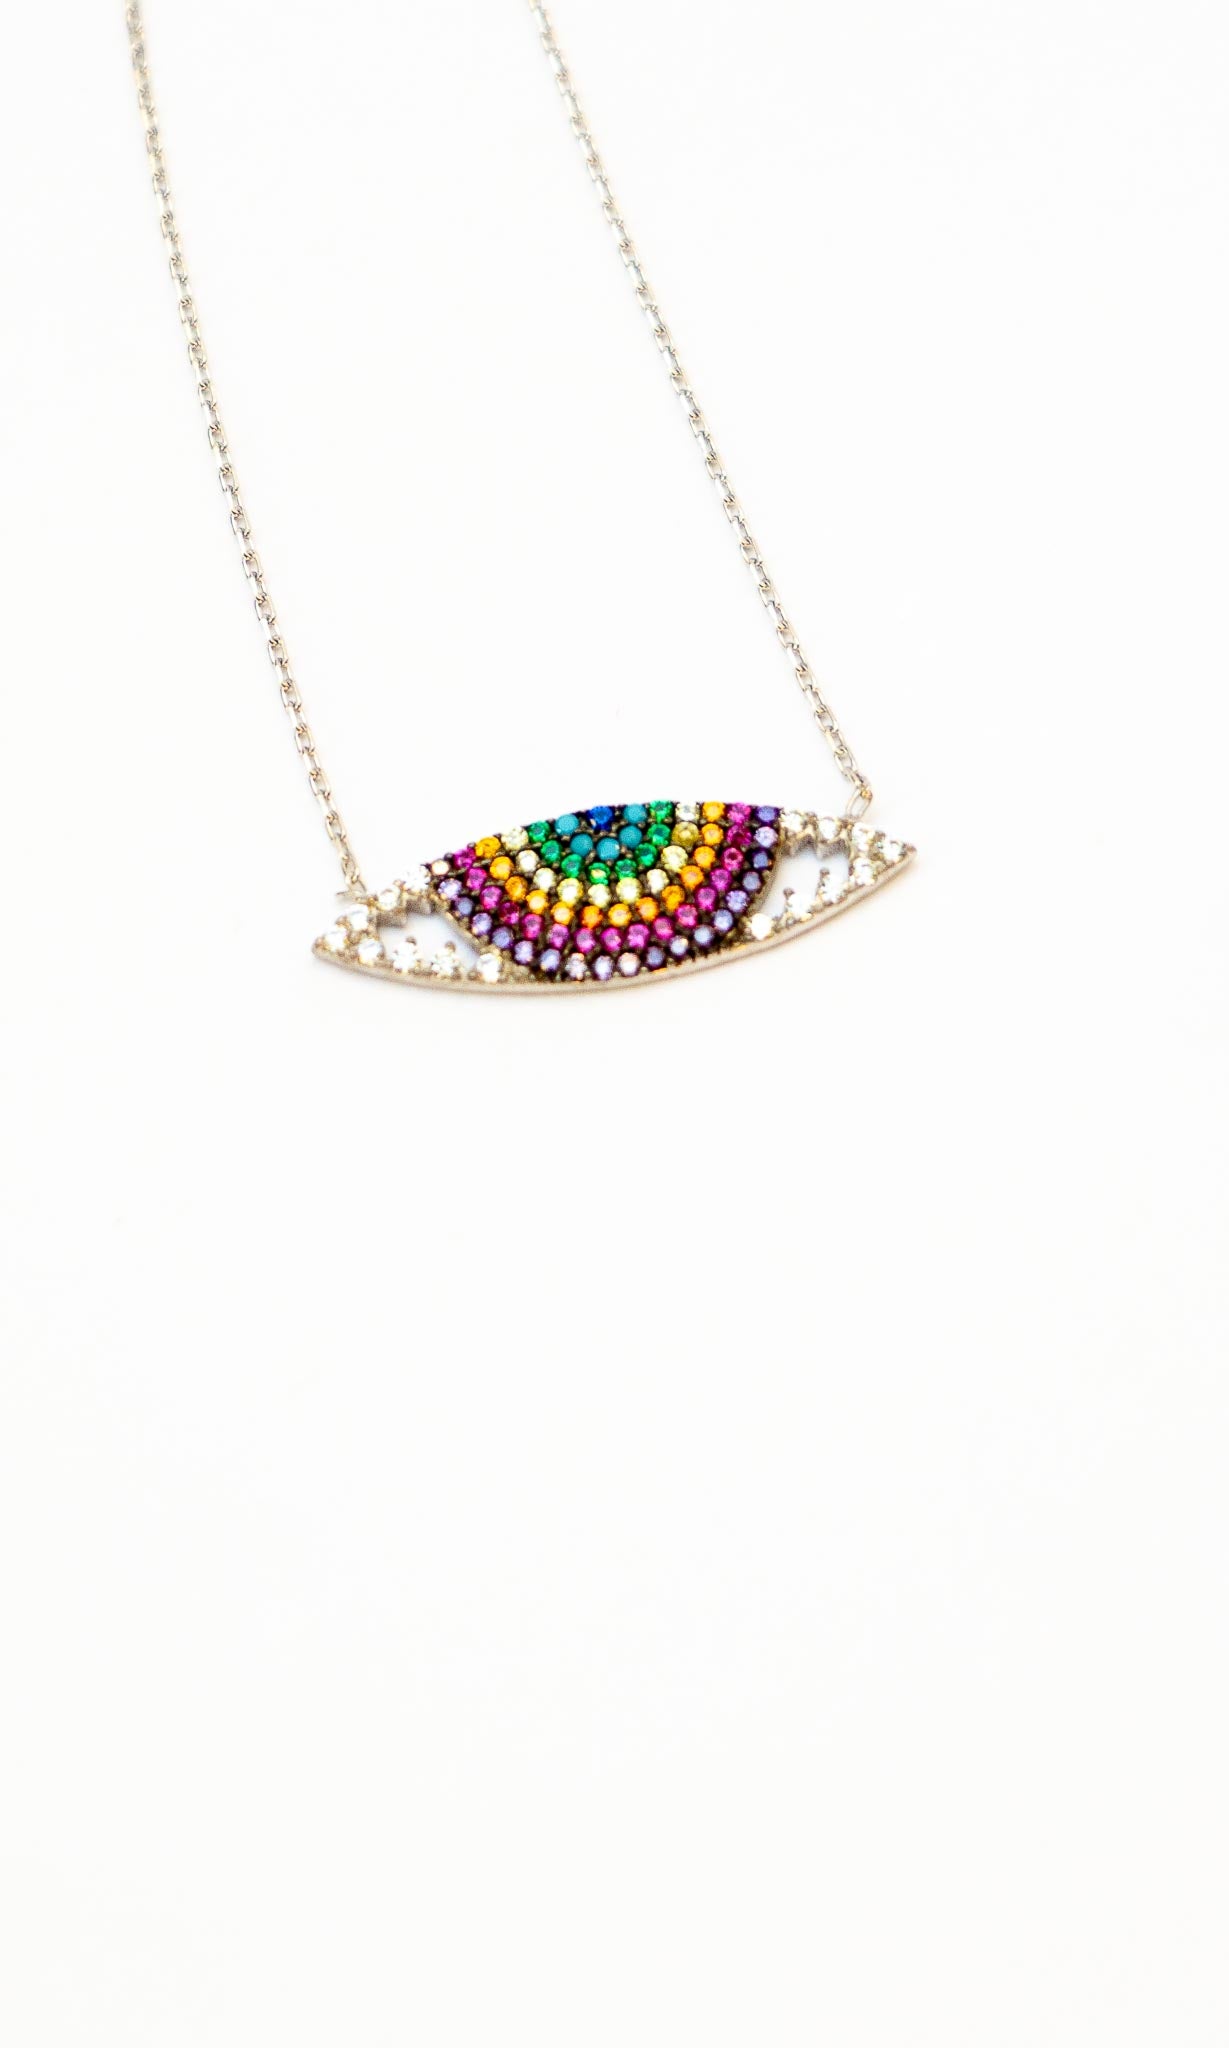 Rainbow Evil Eye Necklace Jewelry The Canyon